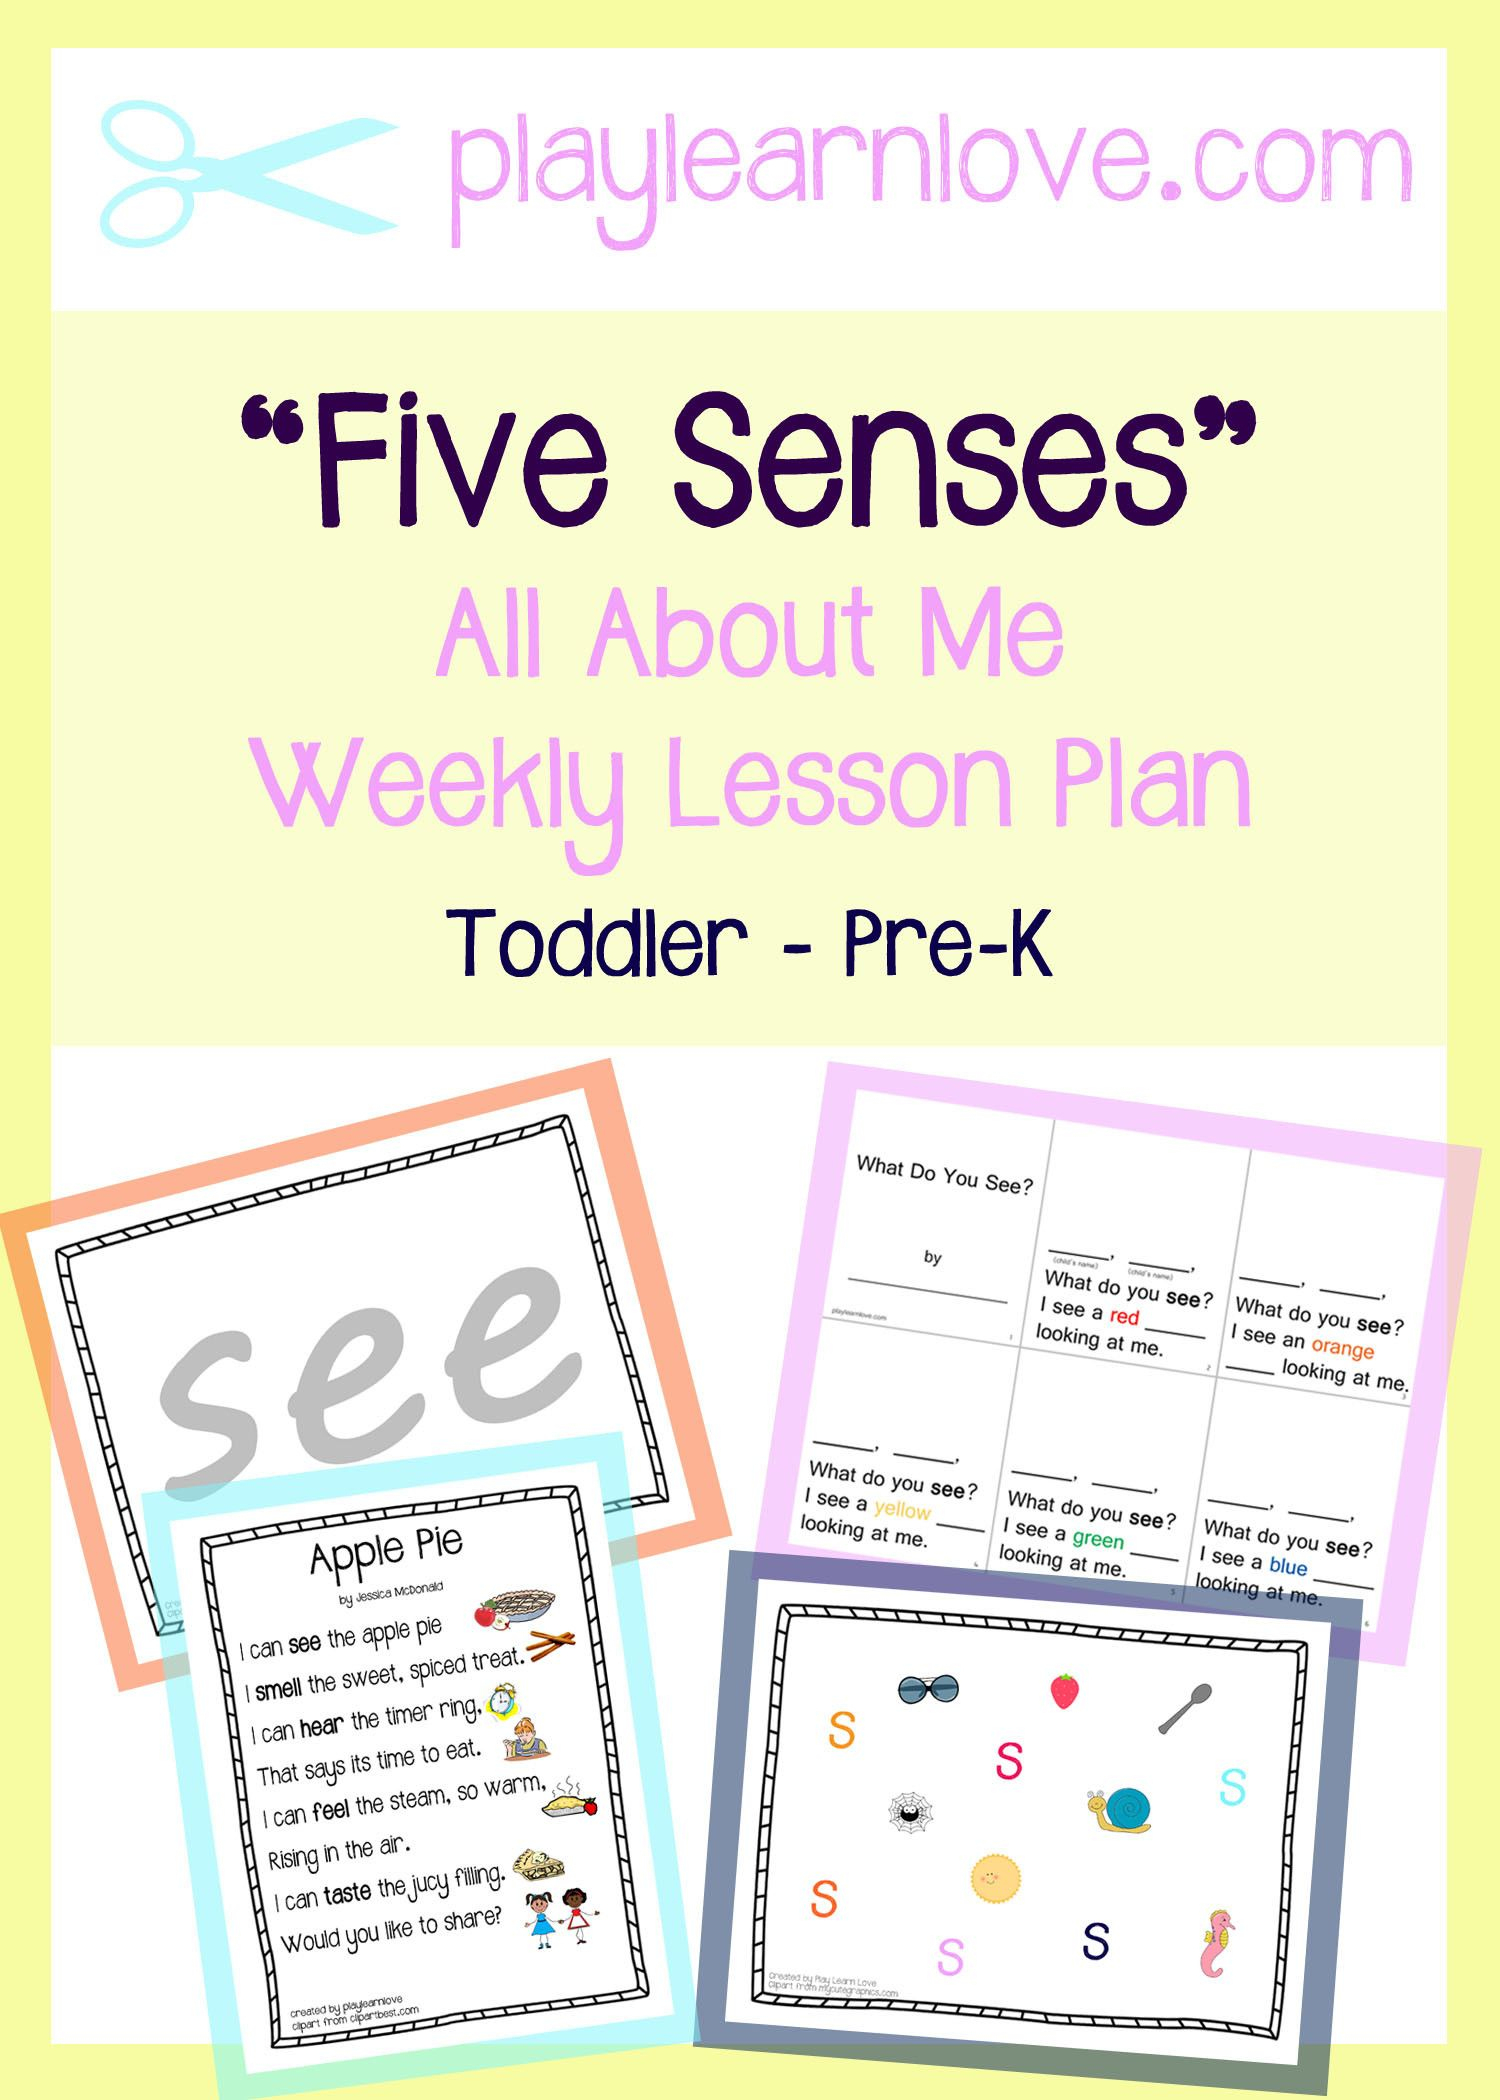 Five Senses Lesson Plan - From Play Learn Love | Lesson